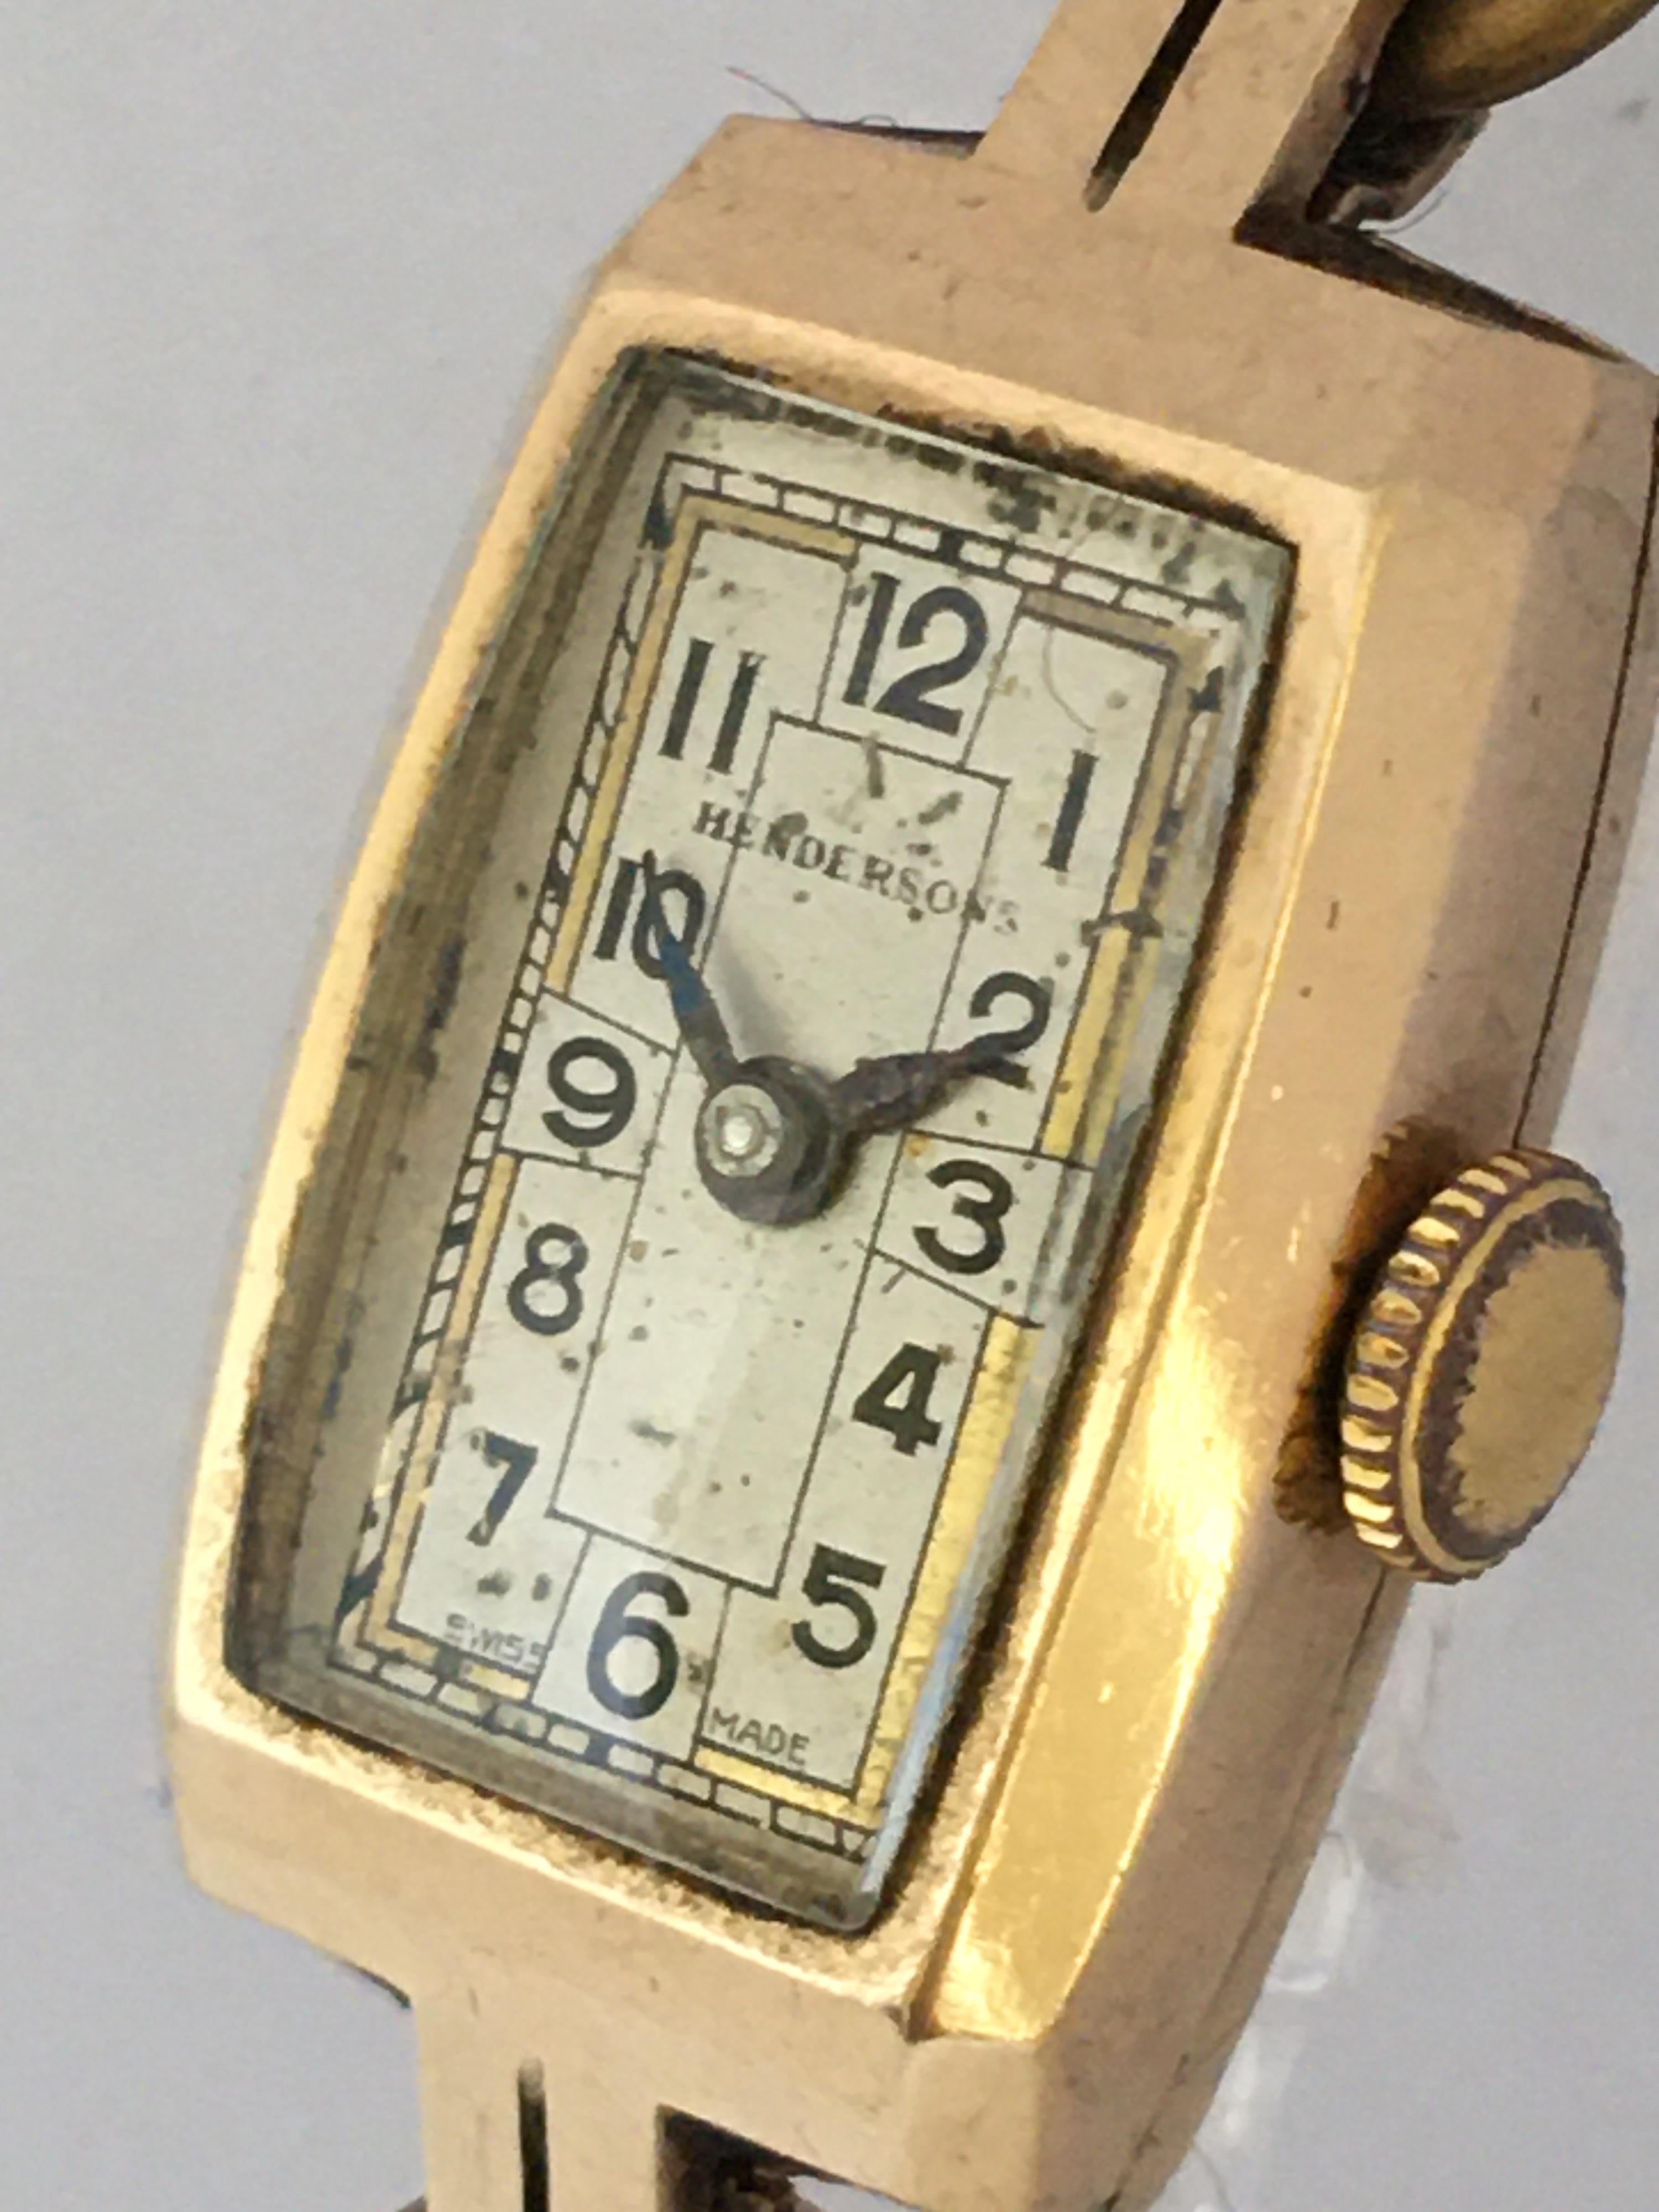 This beautiful vintage pre-owned hand winding ladies gold watch is working and it is ticking and running well. Some deterioration on the silvered dial as shown. Light and tiny scratches on the gold watch case. The old mulled wine colour strap is a